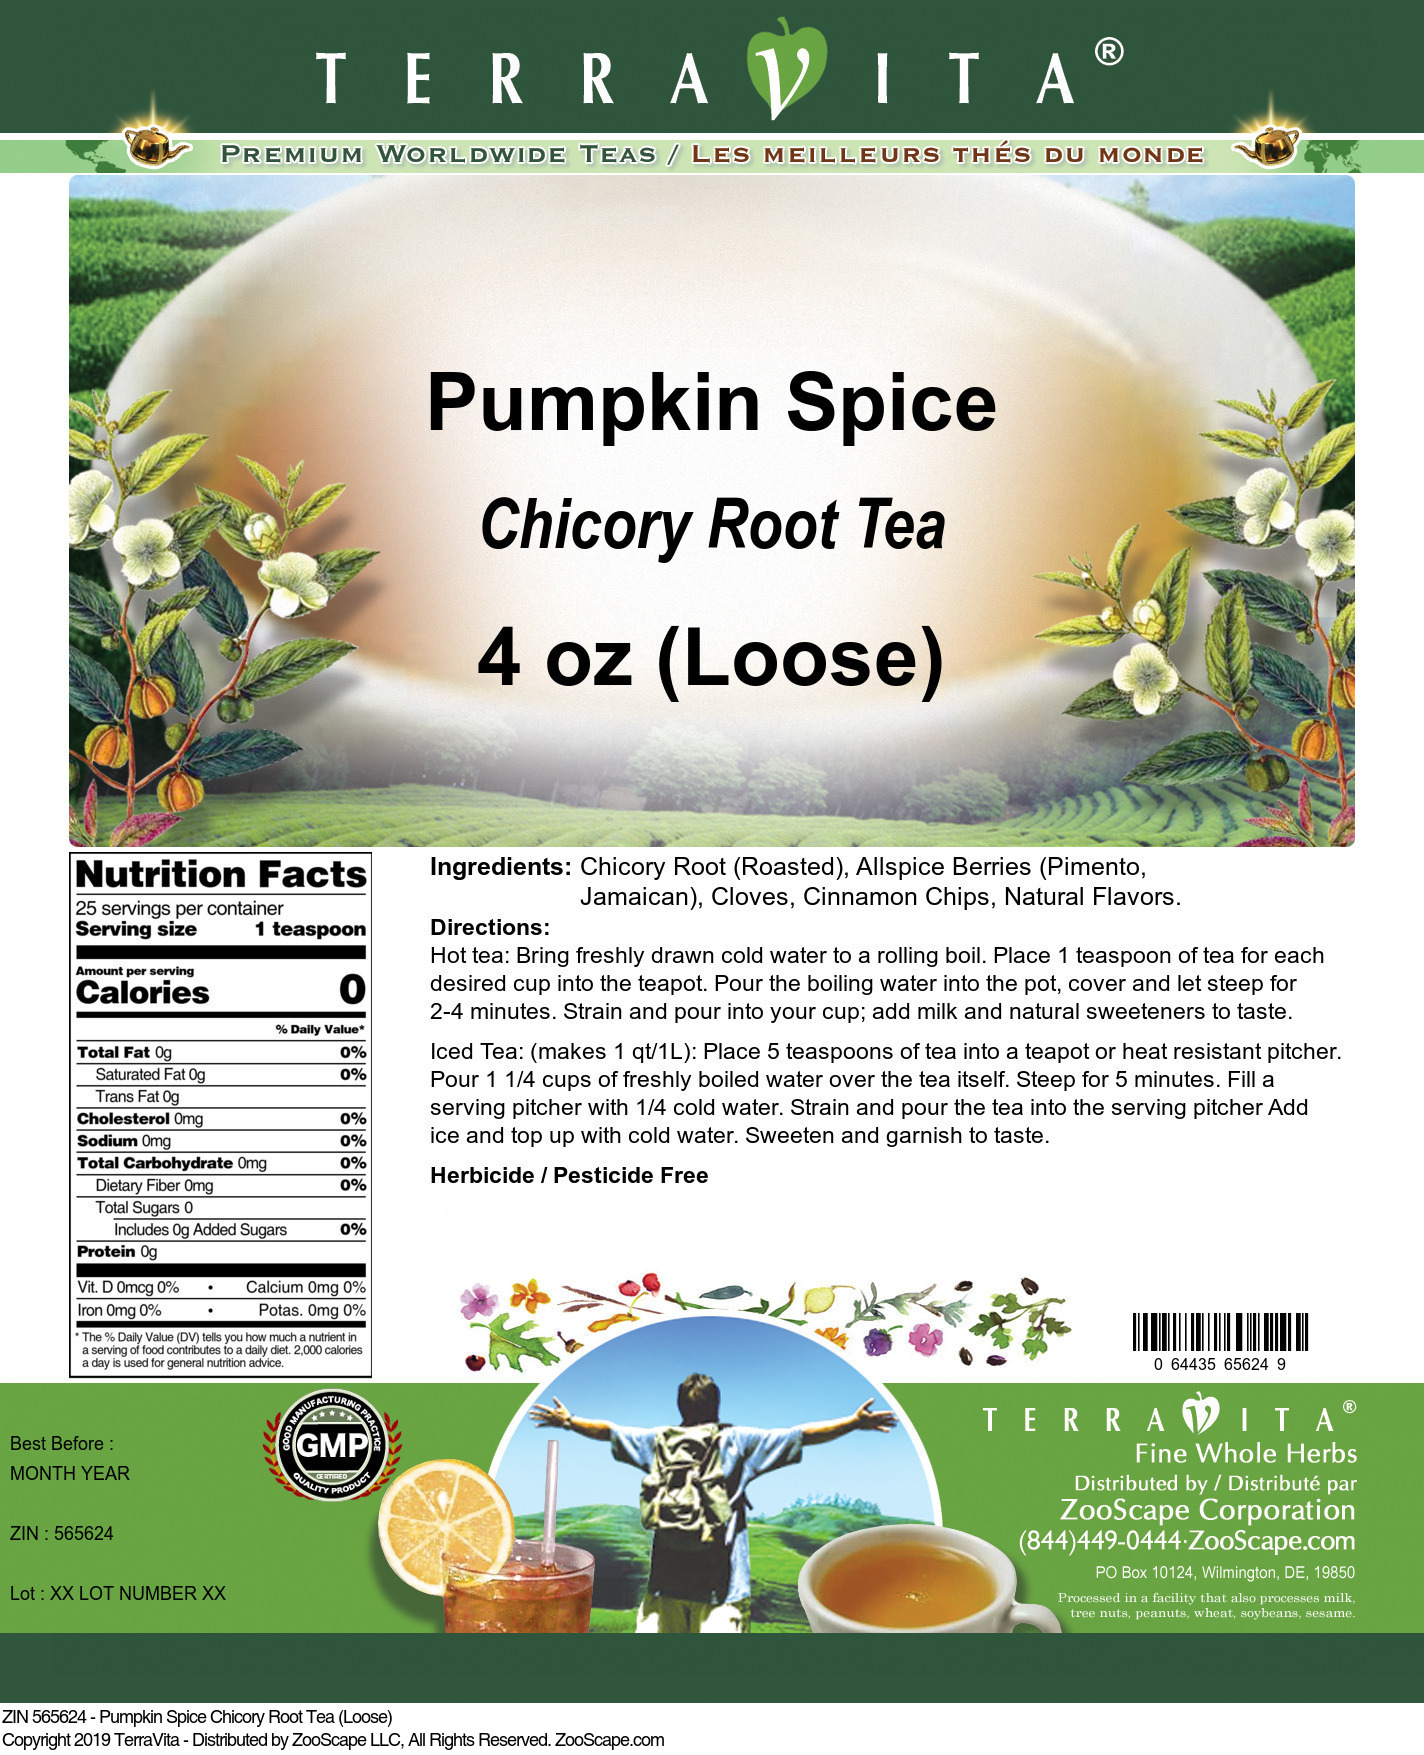 Pumpkin Spice Chicory Root Tea (Loose) - Label